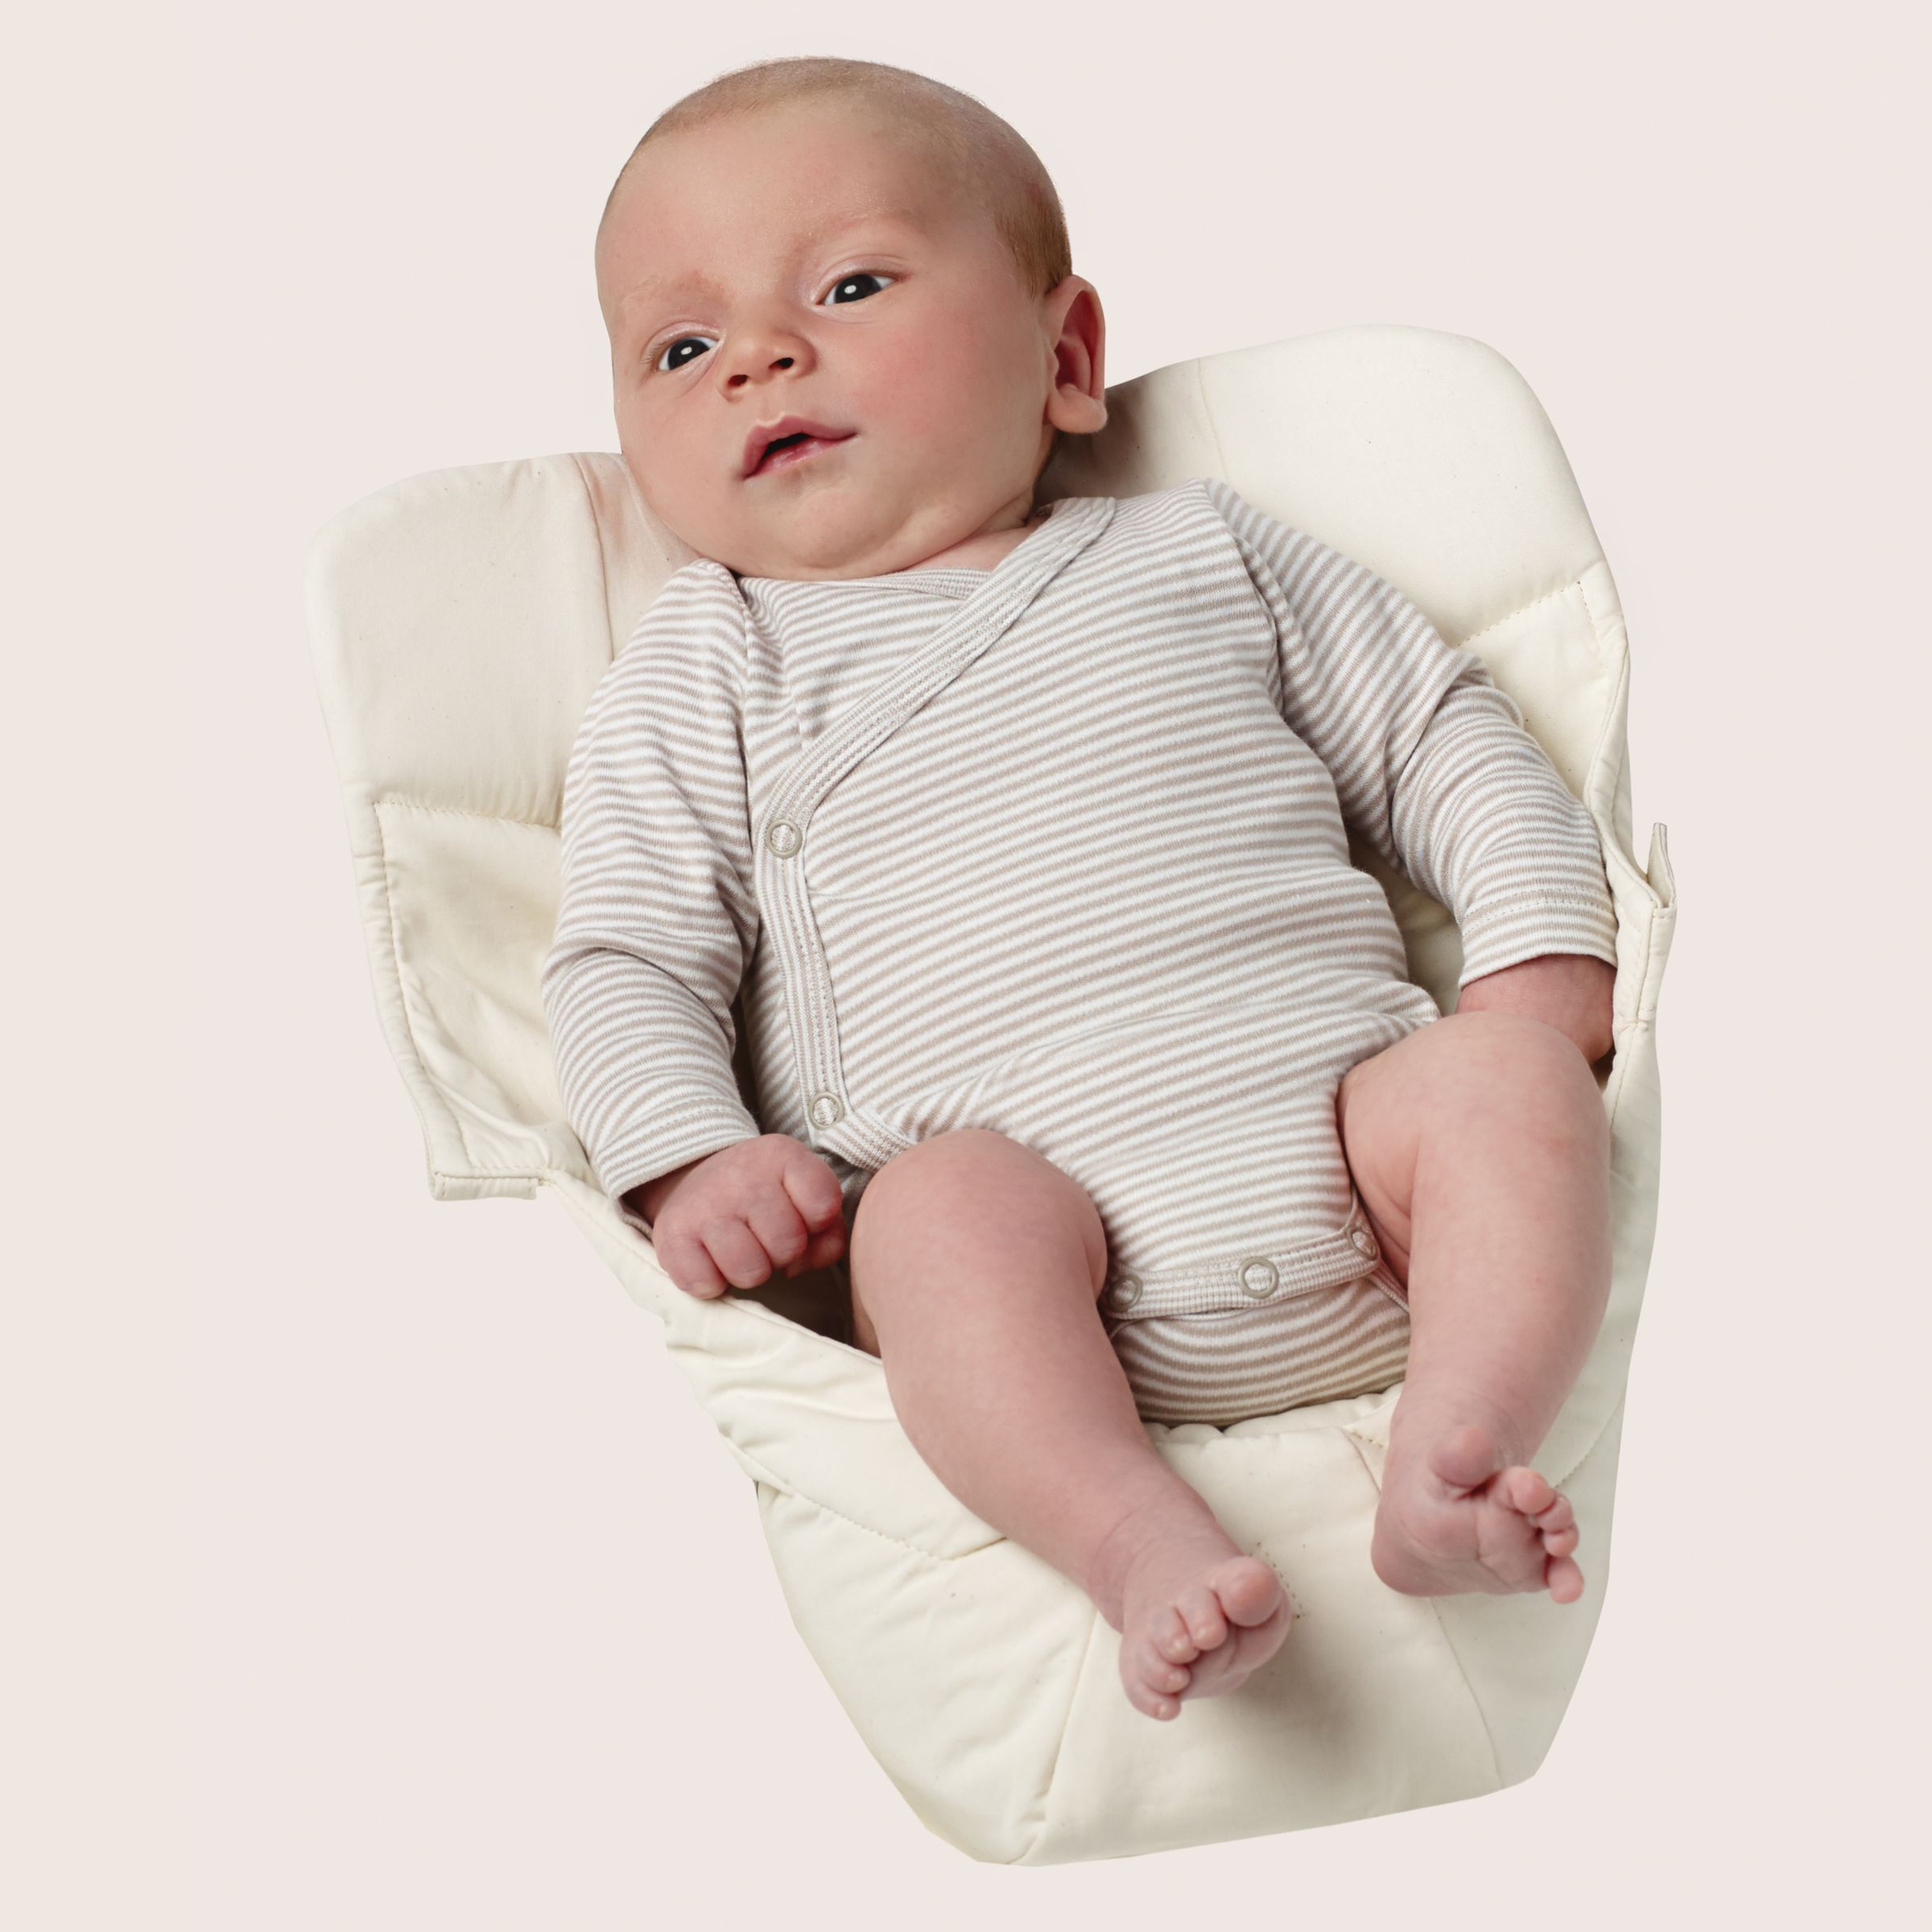 how to put on ergobaby with infant insert